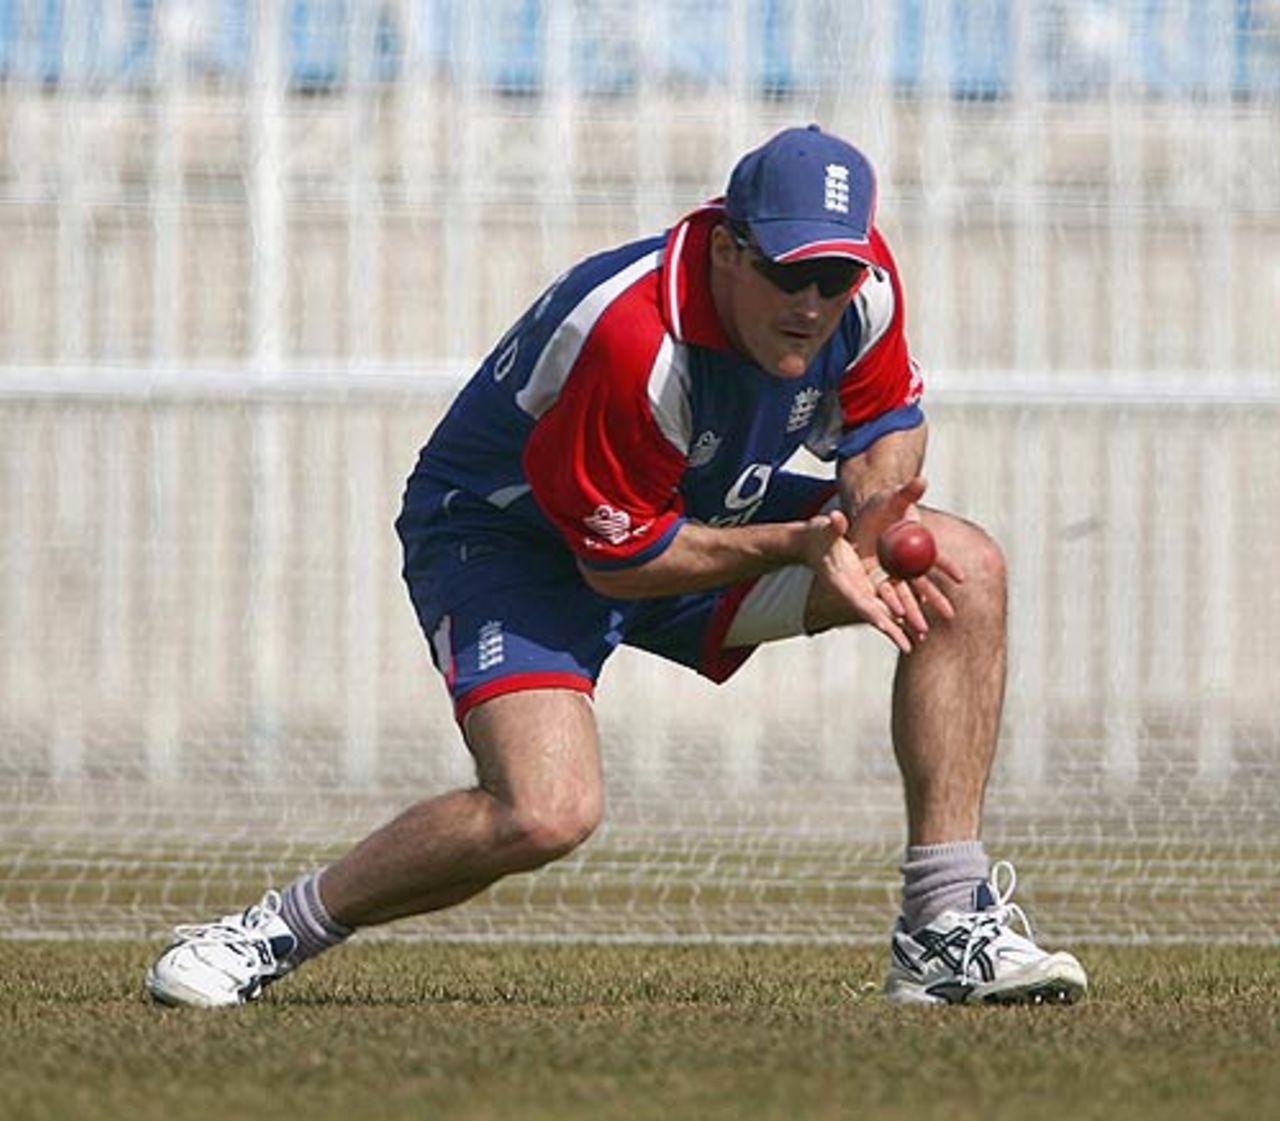 Andrew Strauss takes part in a training session, Rawalpindi Cricket Stadium, October 29, 2005